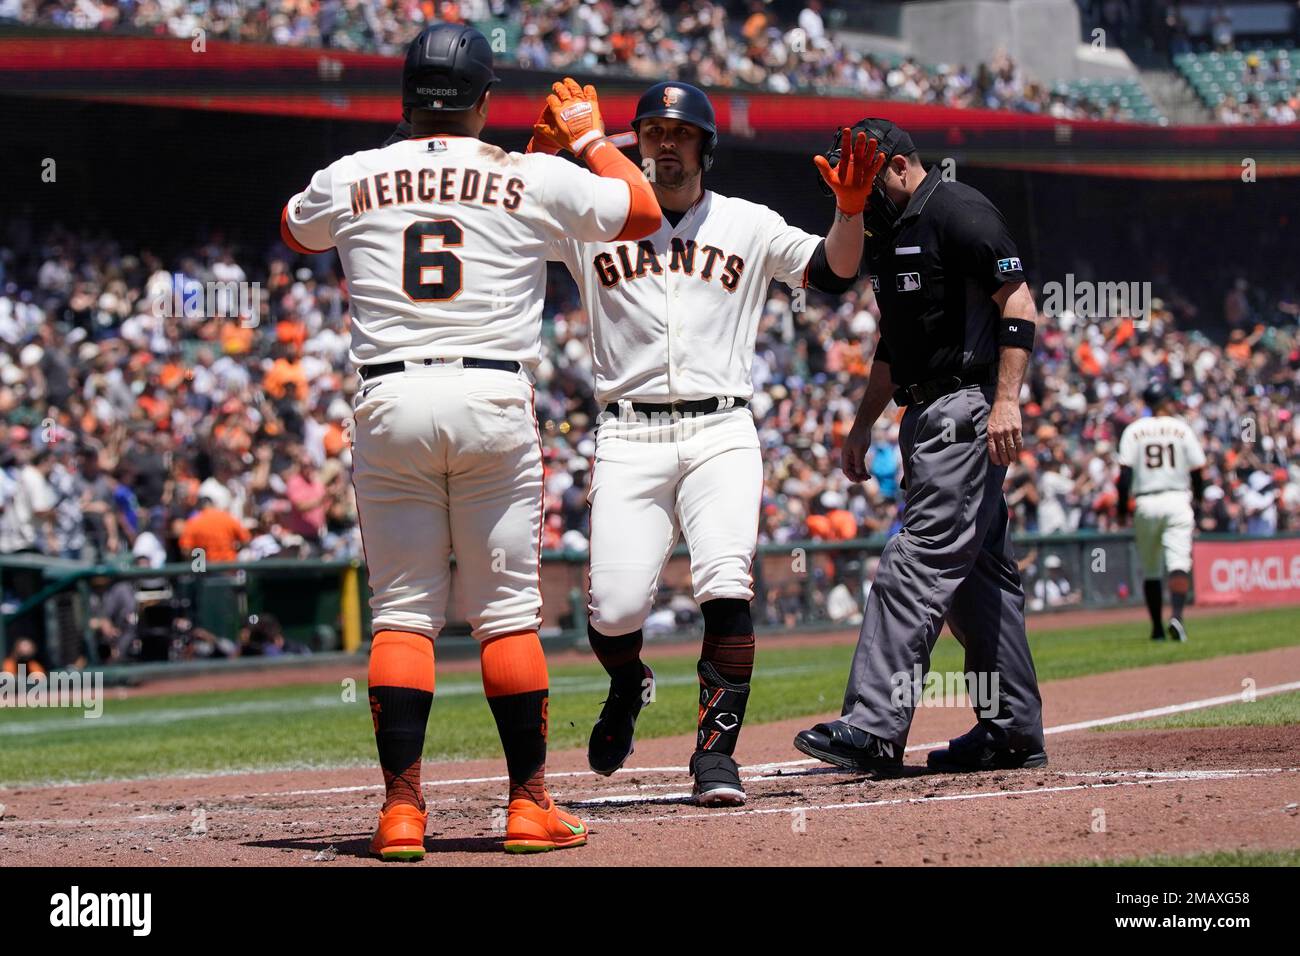 San Francisco Giants' J.D. Davis, right, is congratulated by